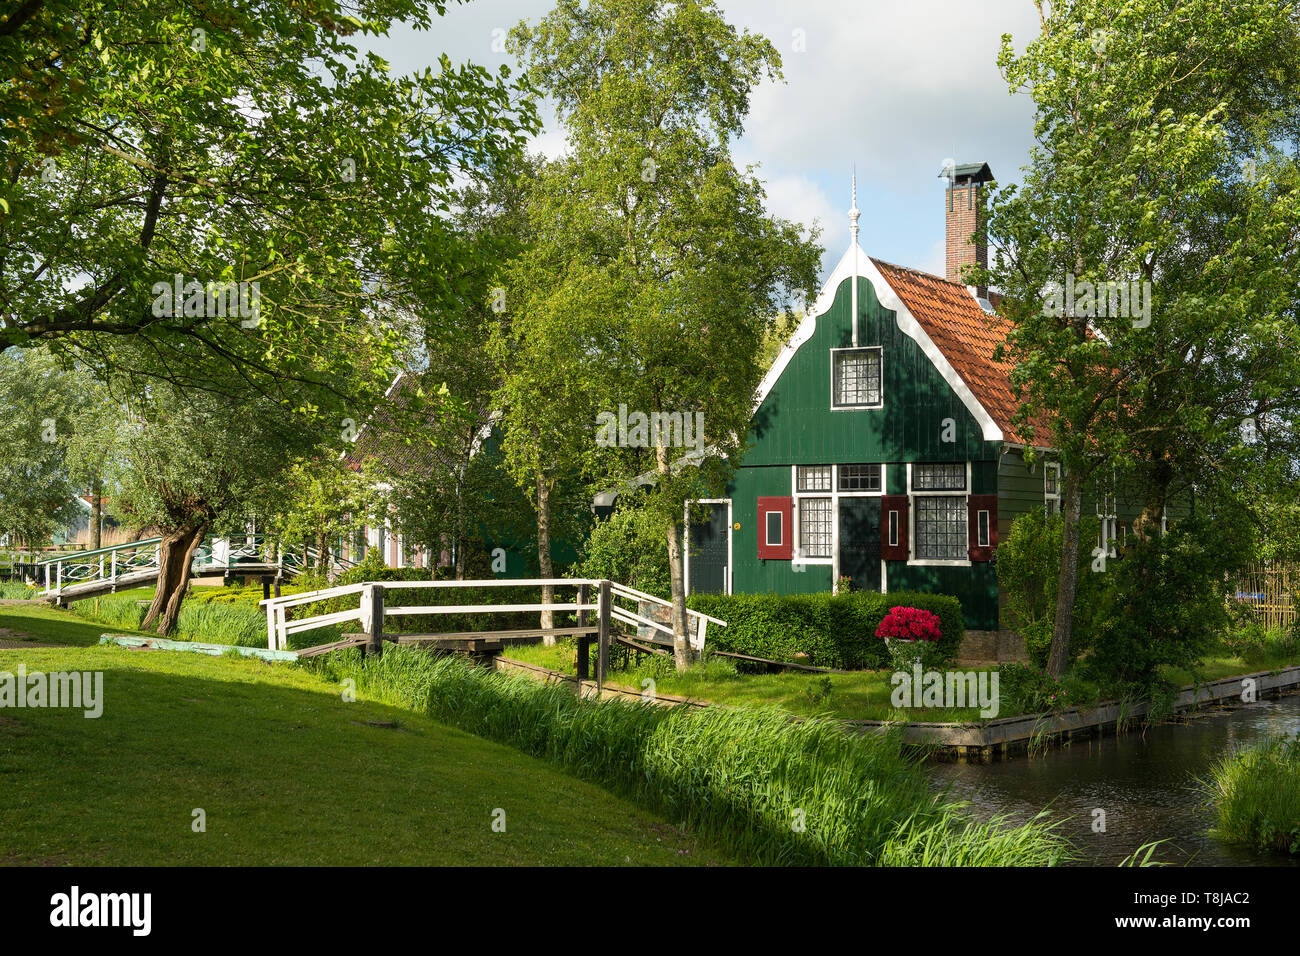 Traditional wooden green house in a traditional village the Zaanse schans in the Netherlands near Amsterdam which is populair with tourists Stock Photo